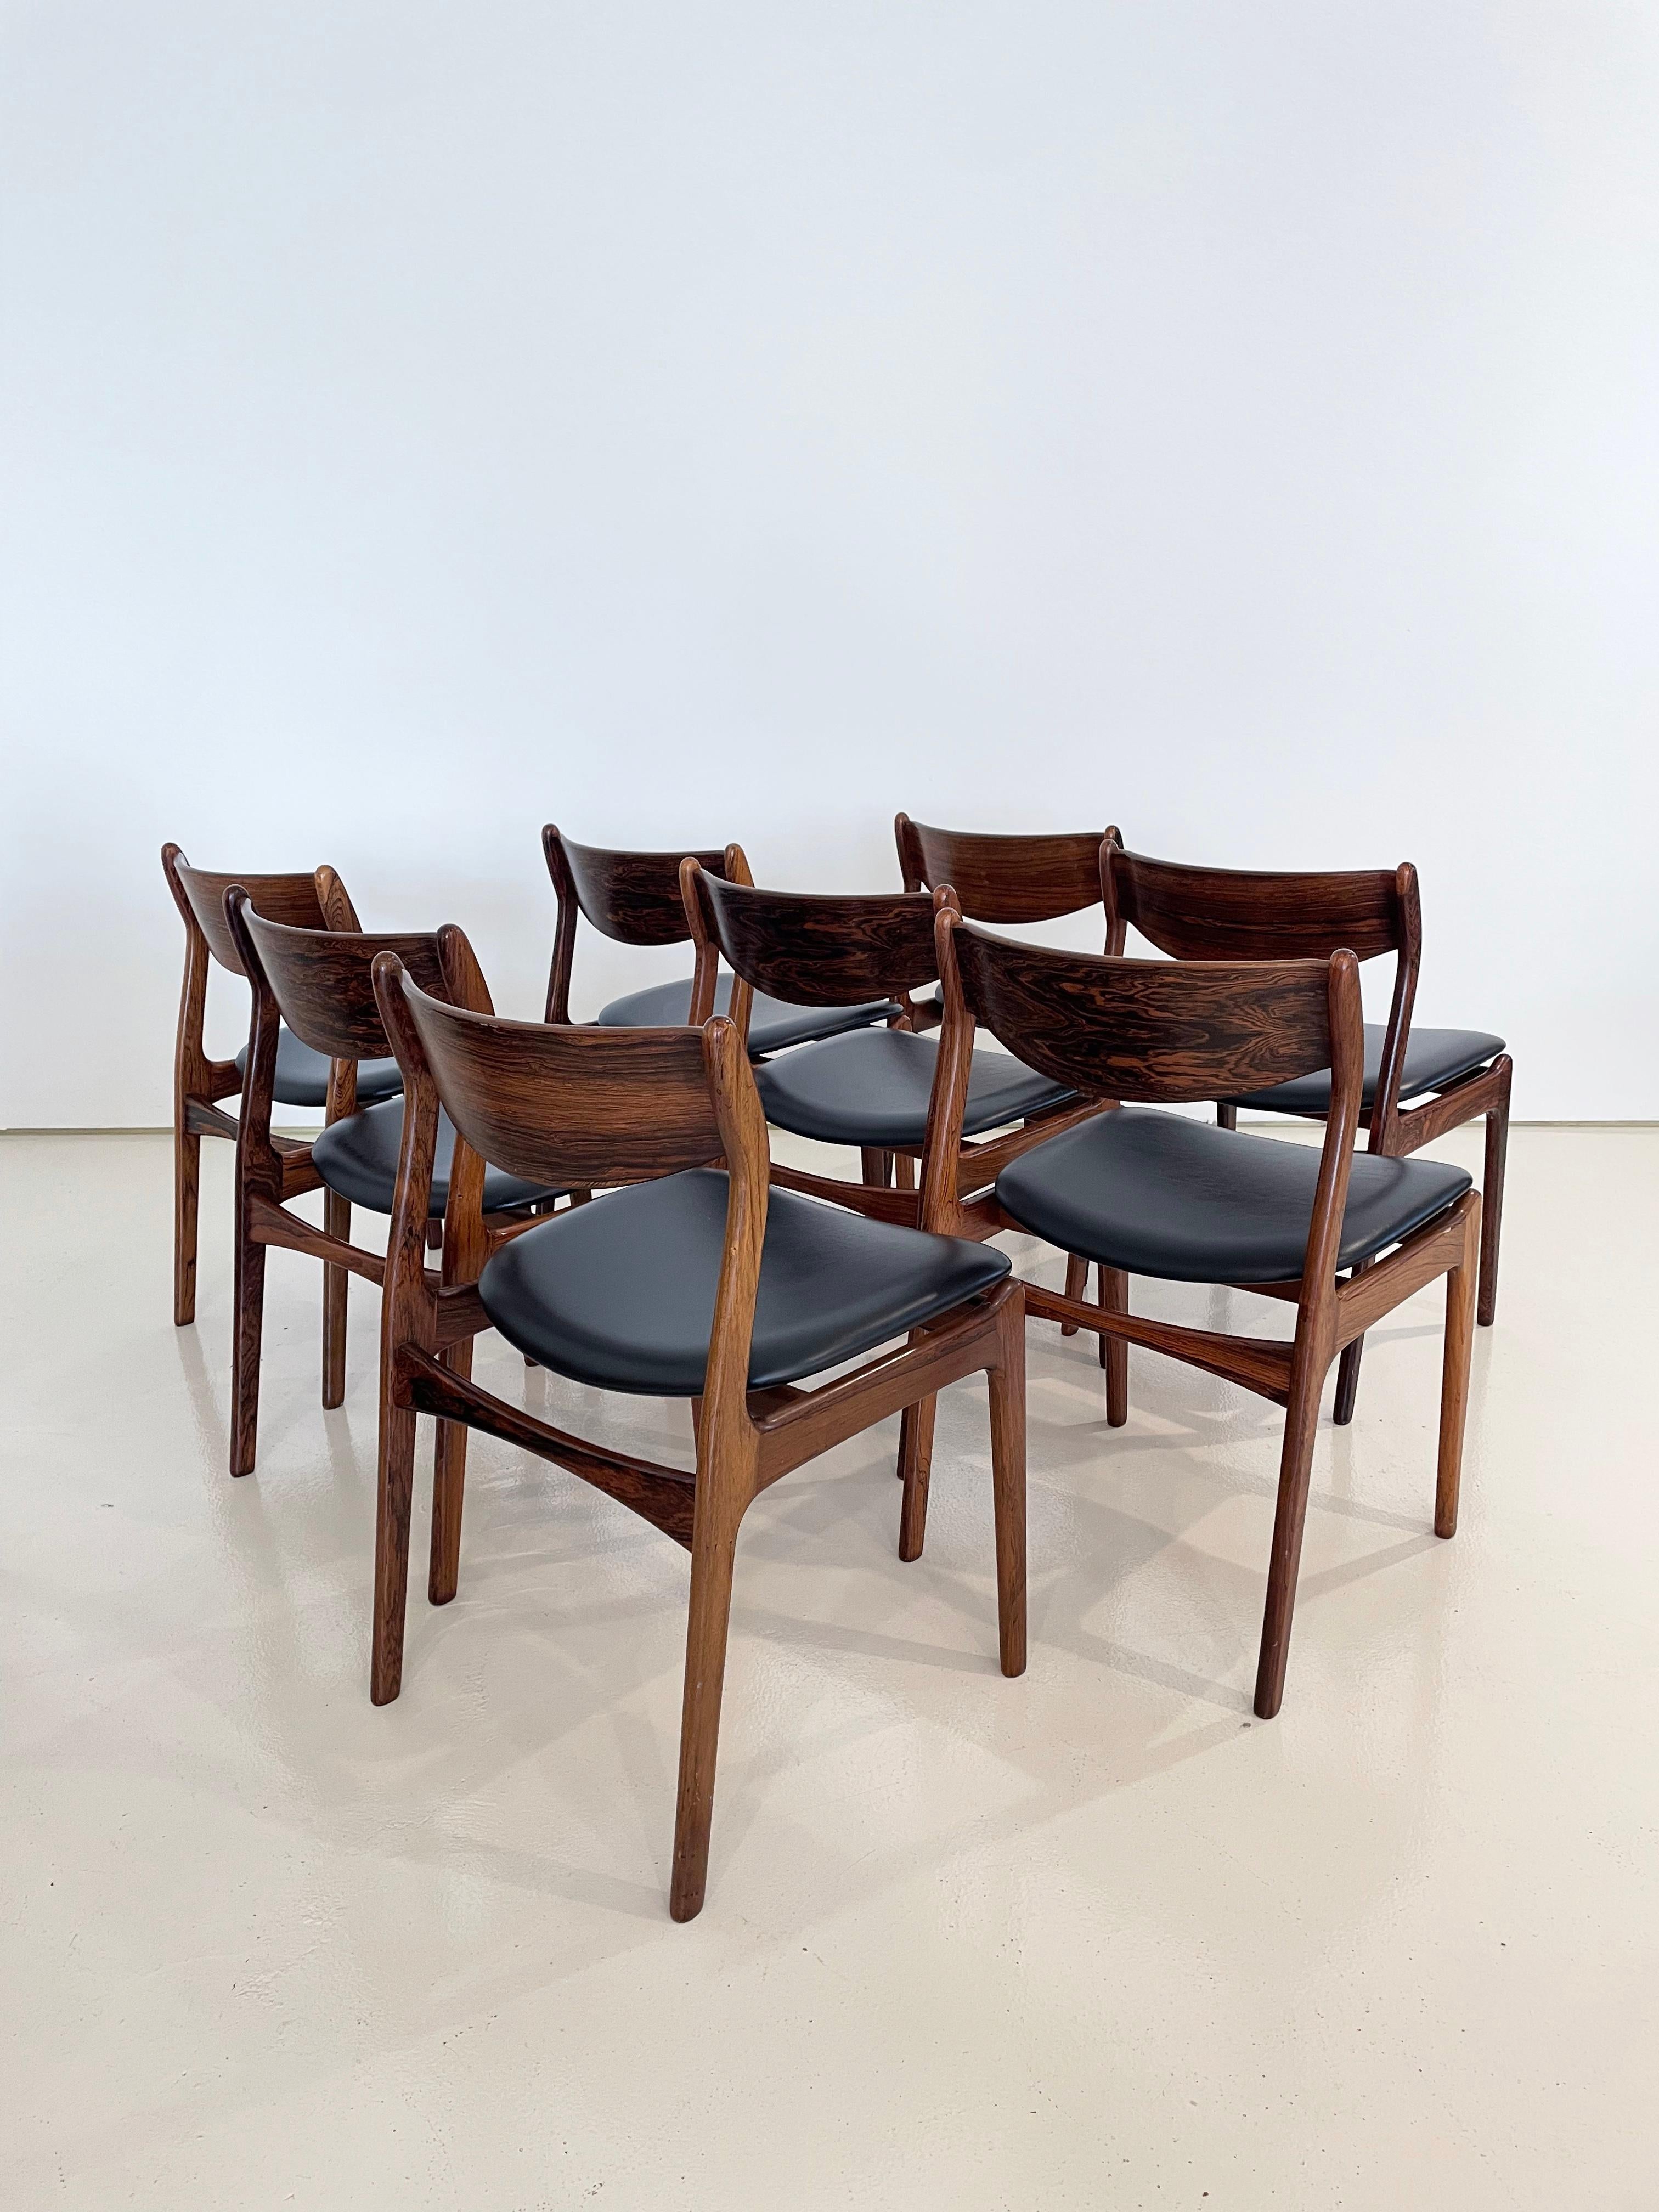 Vintage Mid-century Danish Dining Chairs, Designed by P.E. Jorgensen, Set of 8 In Good Condition For Sale In Denver, CO